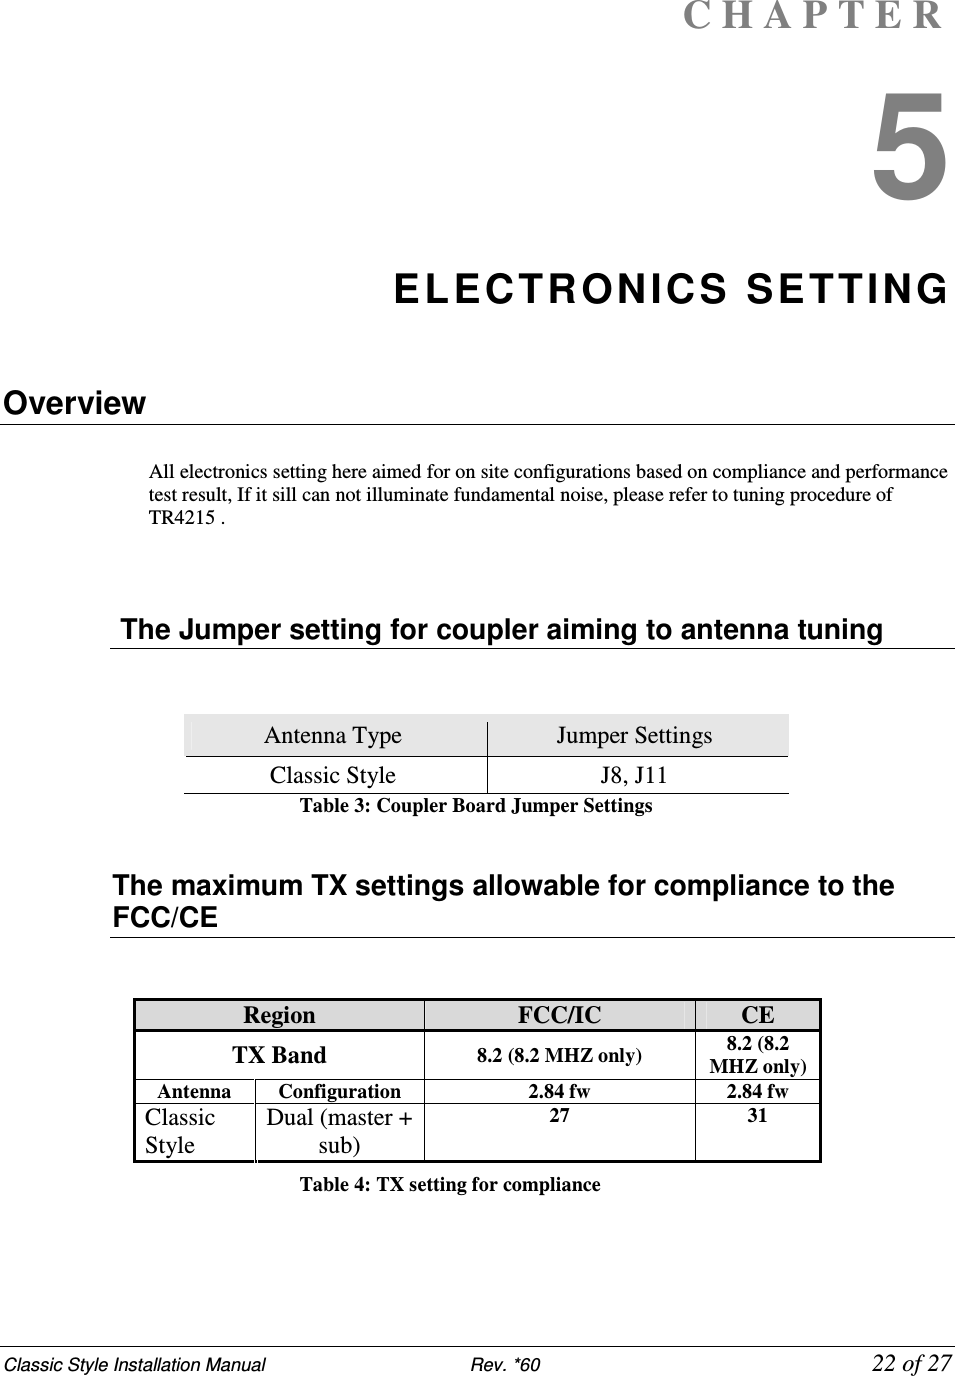 Classic Style Installation Manual                           Rev. *60             22 of 27 C H A P T E R  5 ELECTRONICS SETTING  Overview  All electronics setting here aimed for on site configurations based on compliance and performance test result, If it sill can not illuminate fundamental noise, please refer to tuning procedure of TR4215 .     The Jumper setting for coupler aiming to antenna tuning   Antenna Type  Jumper Settings Classic Style  J8, J11 Table 3: Coupler Board Jumper Settings  The maximum TX settings allowable for compliance to the FCC/CE         Table 4: TX setting for compliance   Region  FCC/IC  CE TX Band 8.2 (8.2 MHZ only)  8.2 (8.2 MHZ only) Antenna  Configuration  2.84 fw  2.84 fw Classic Style Dual (master + sub) 27  31 